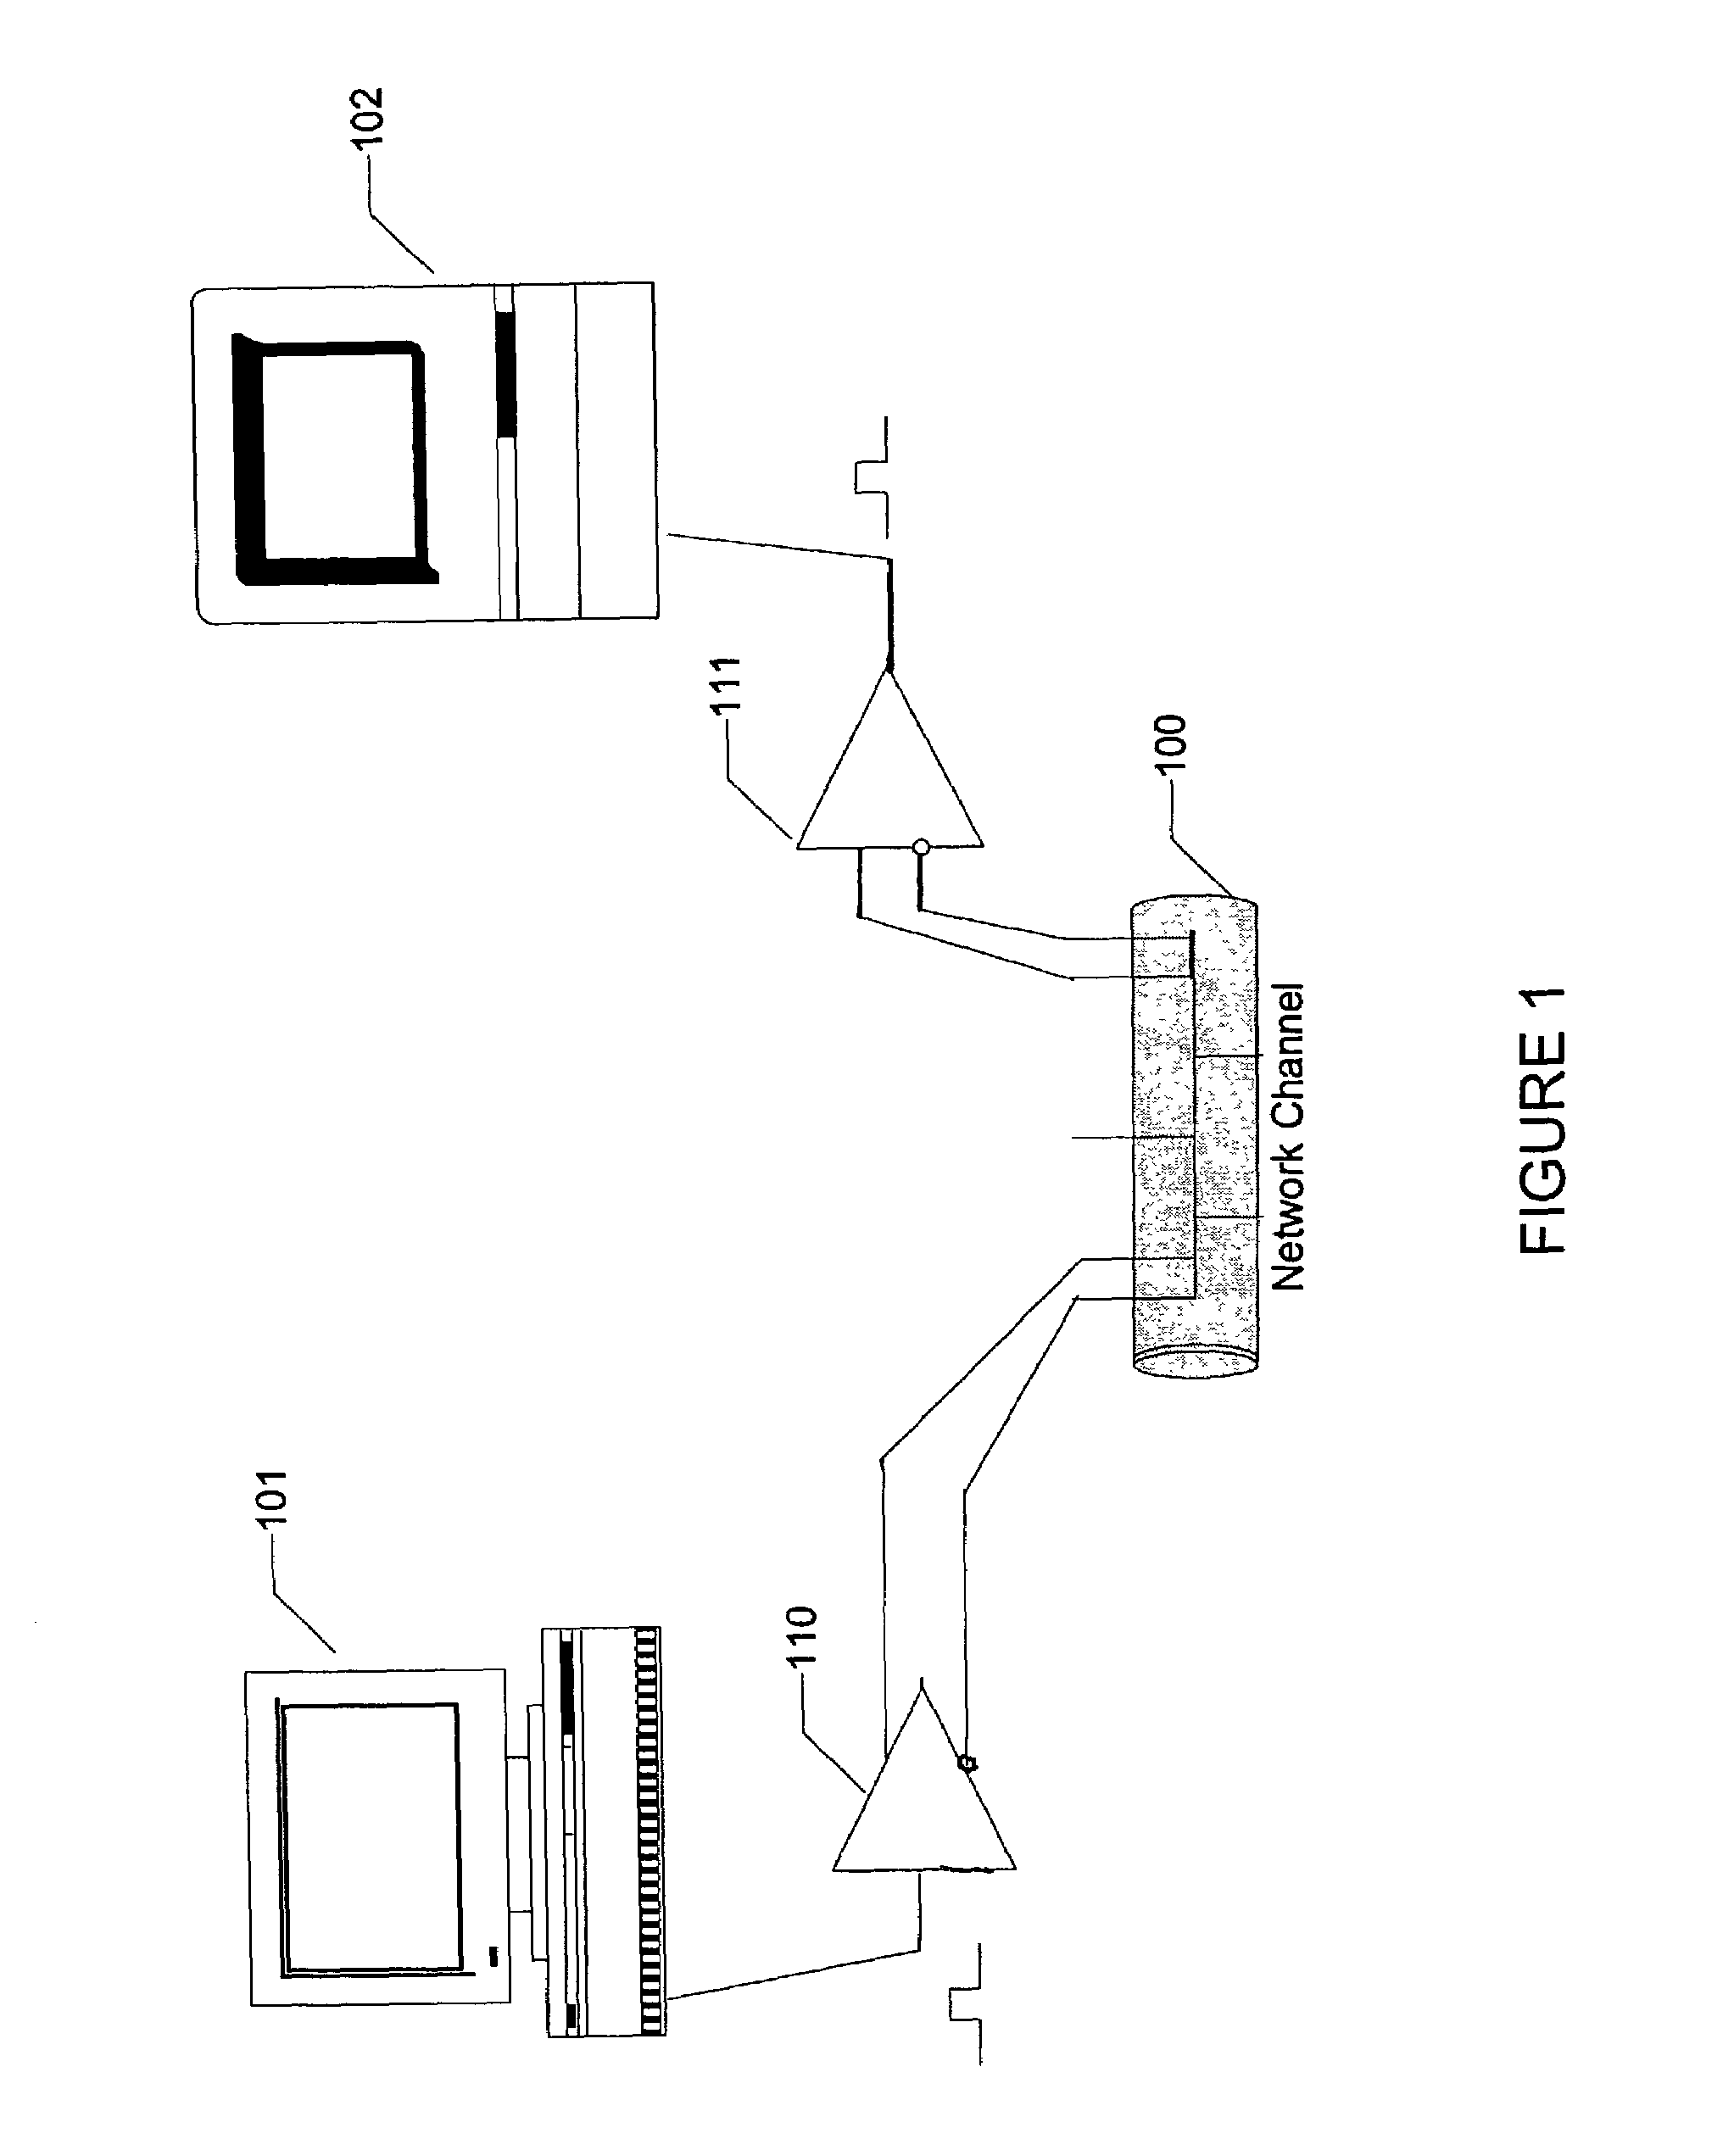 Method and apparatus for encoding and decoding digital communications data